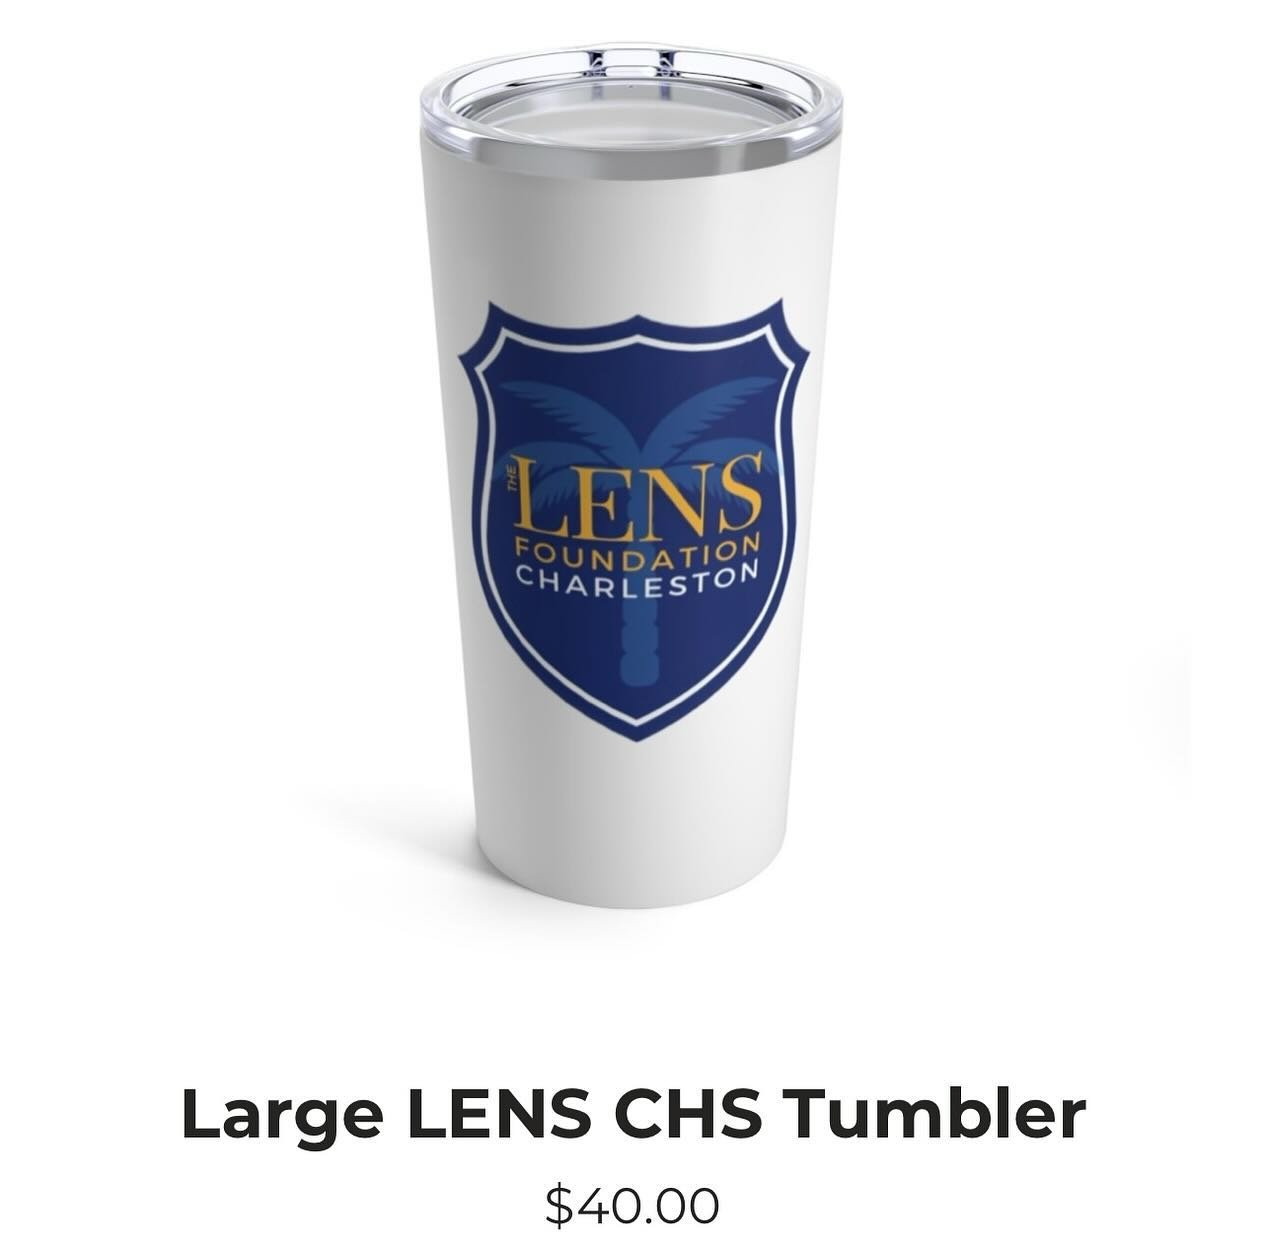 #merchandisemonday Have you had a chance to check out our LENS shop? Visit the link 🔗 in bio for more!

 #lensfoundation #chs #keepingcharlestonsafeandstrong&rdquo;